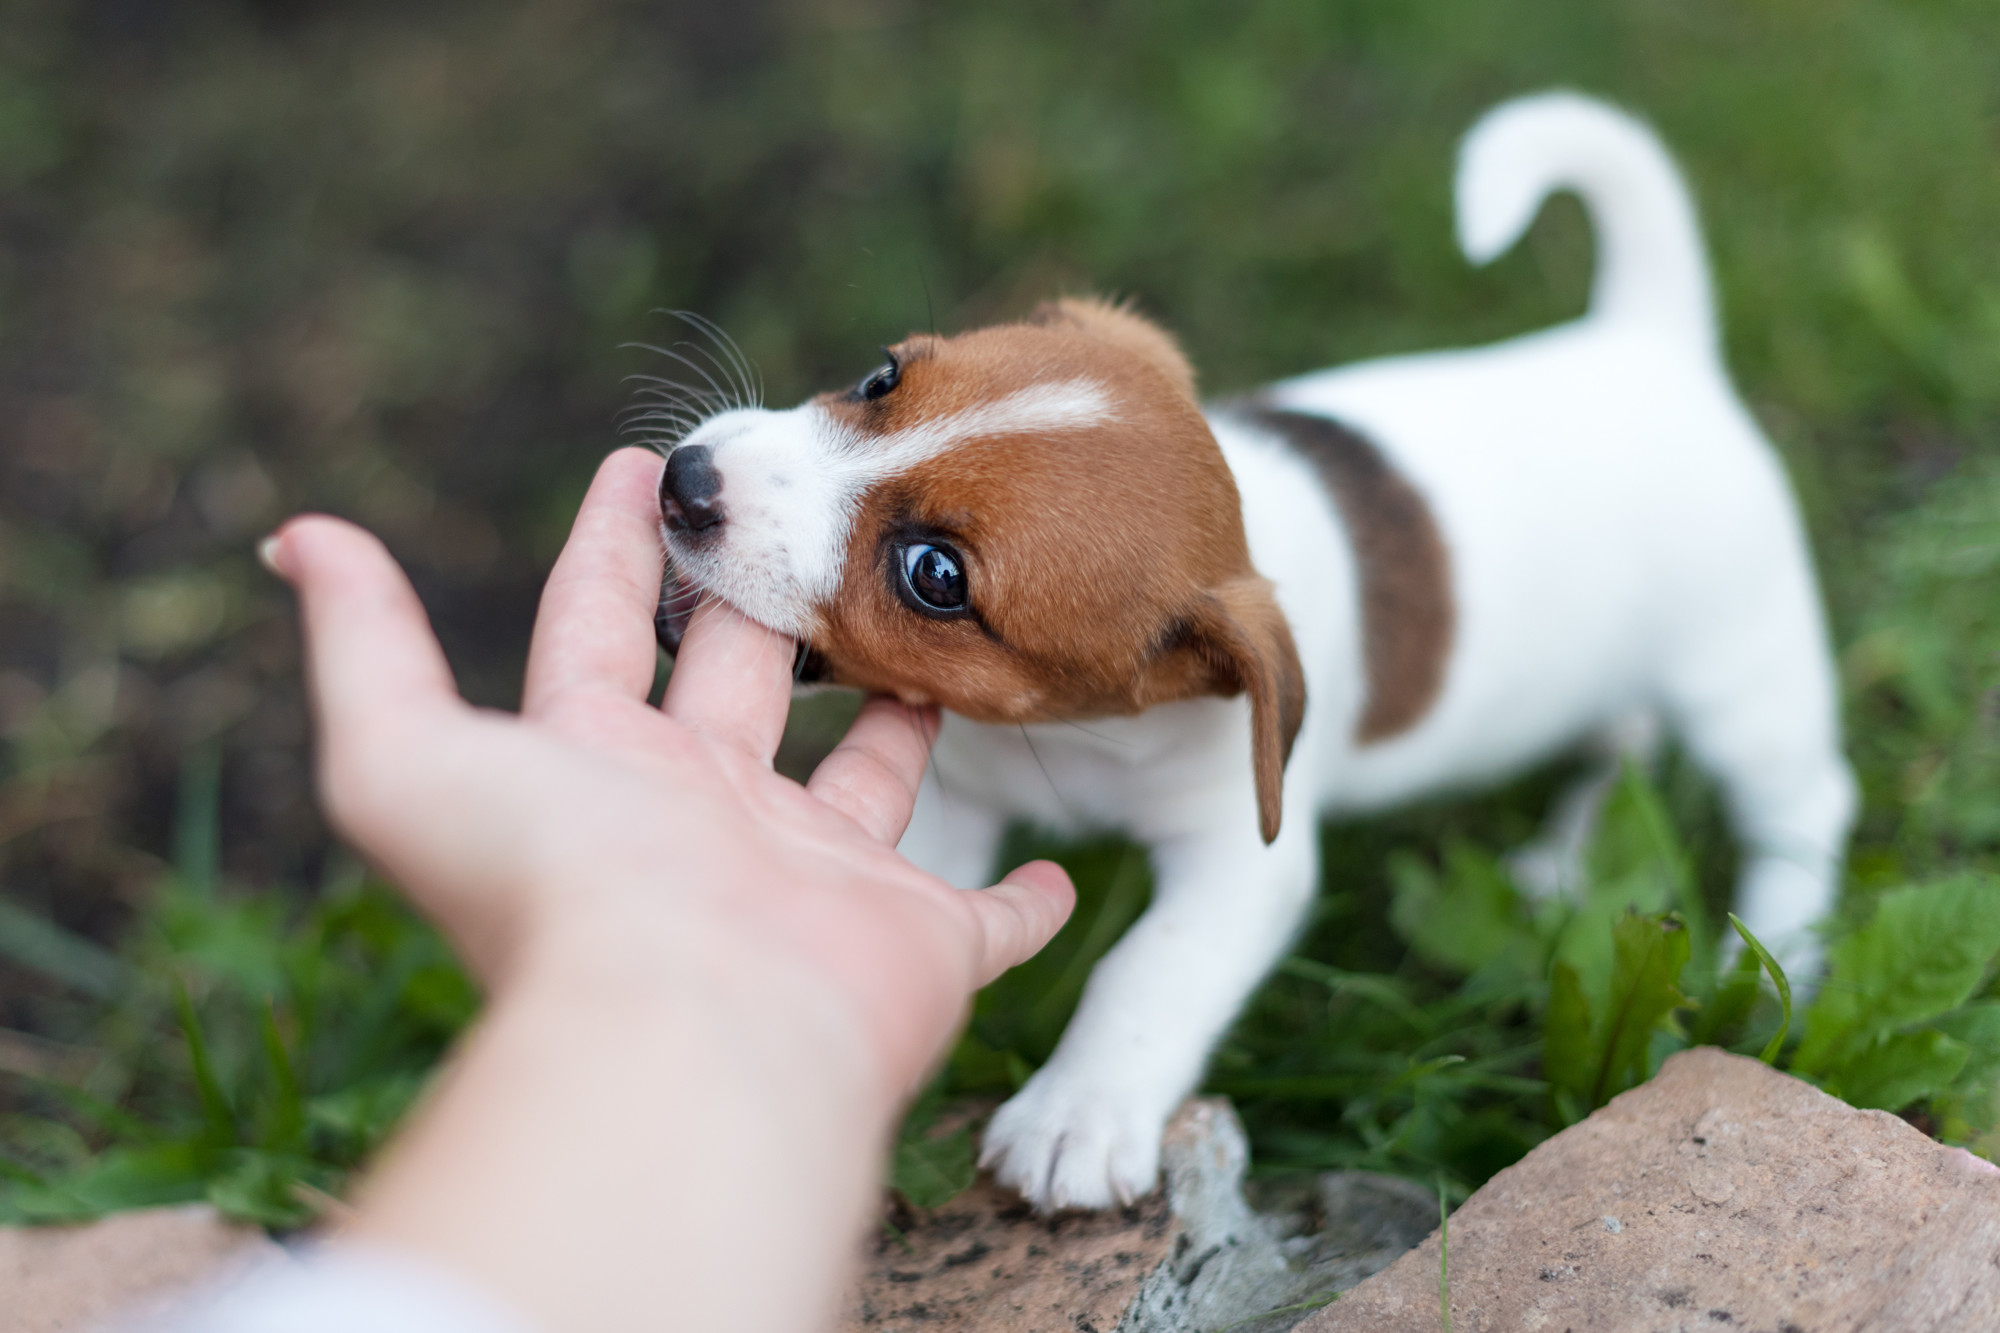 It is important to make sure you are completely up for the job before buying a new puppy. Here's what you should consider before becoming a pet parent.